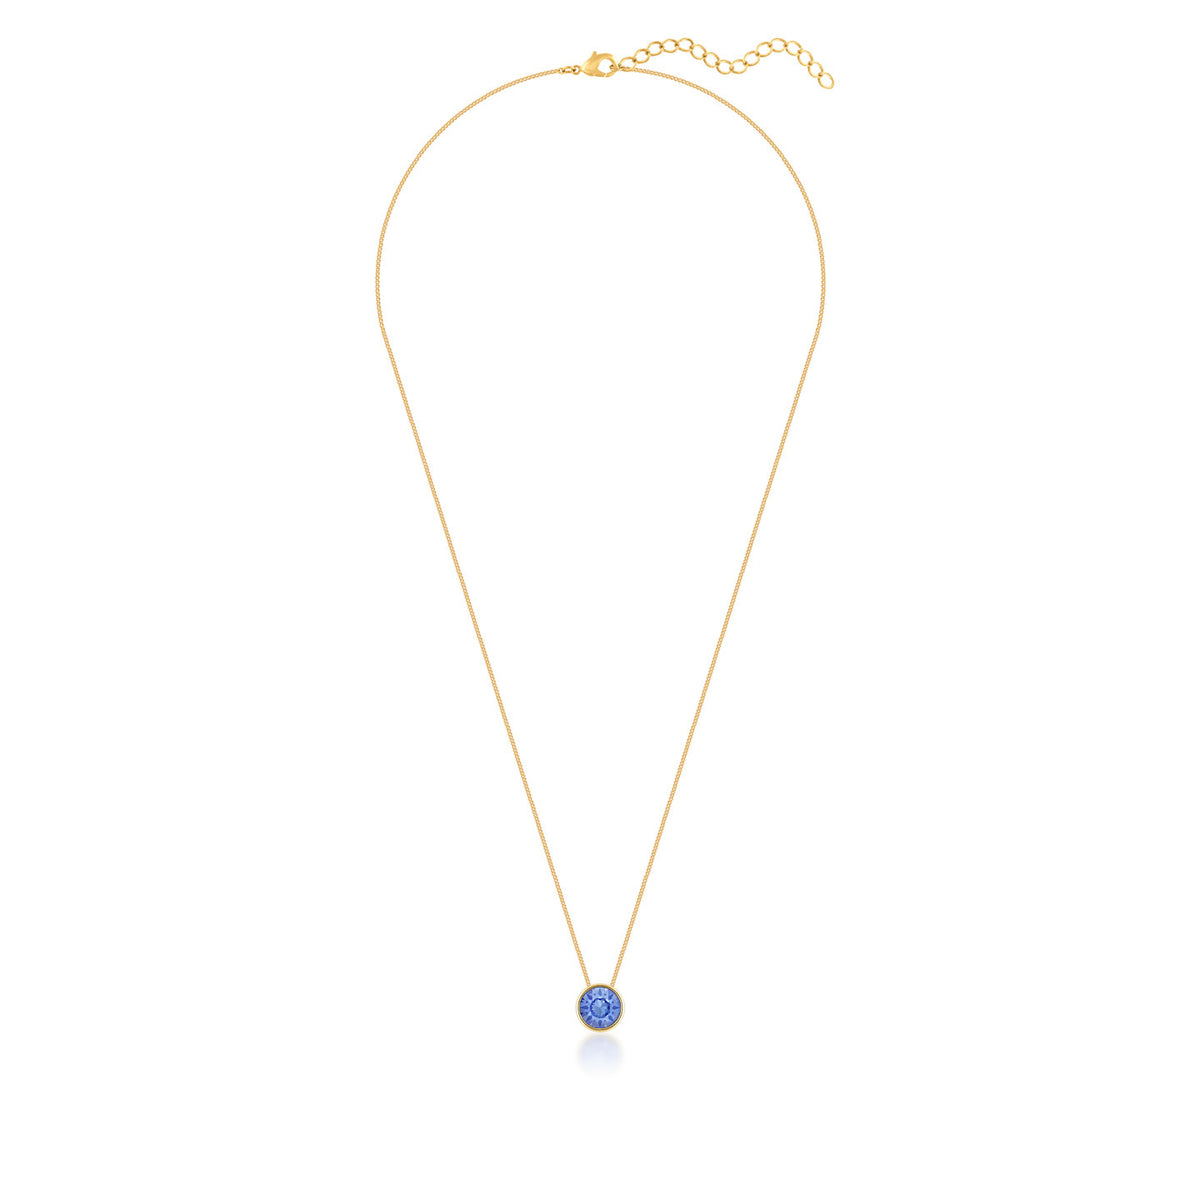 Harley Small Pendant Necklace with Blue Light Sapphire Round Crystals from Swarovski Gold Plated - Ed Heart